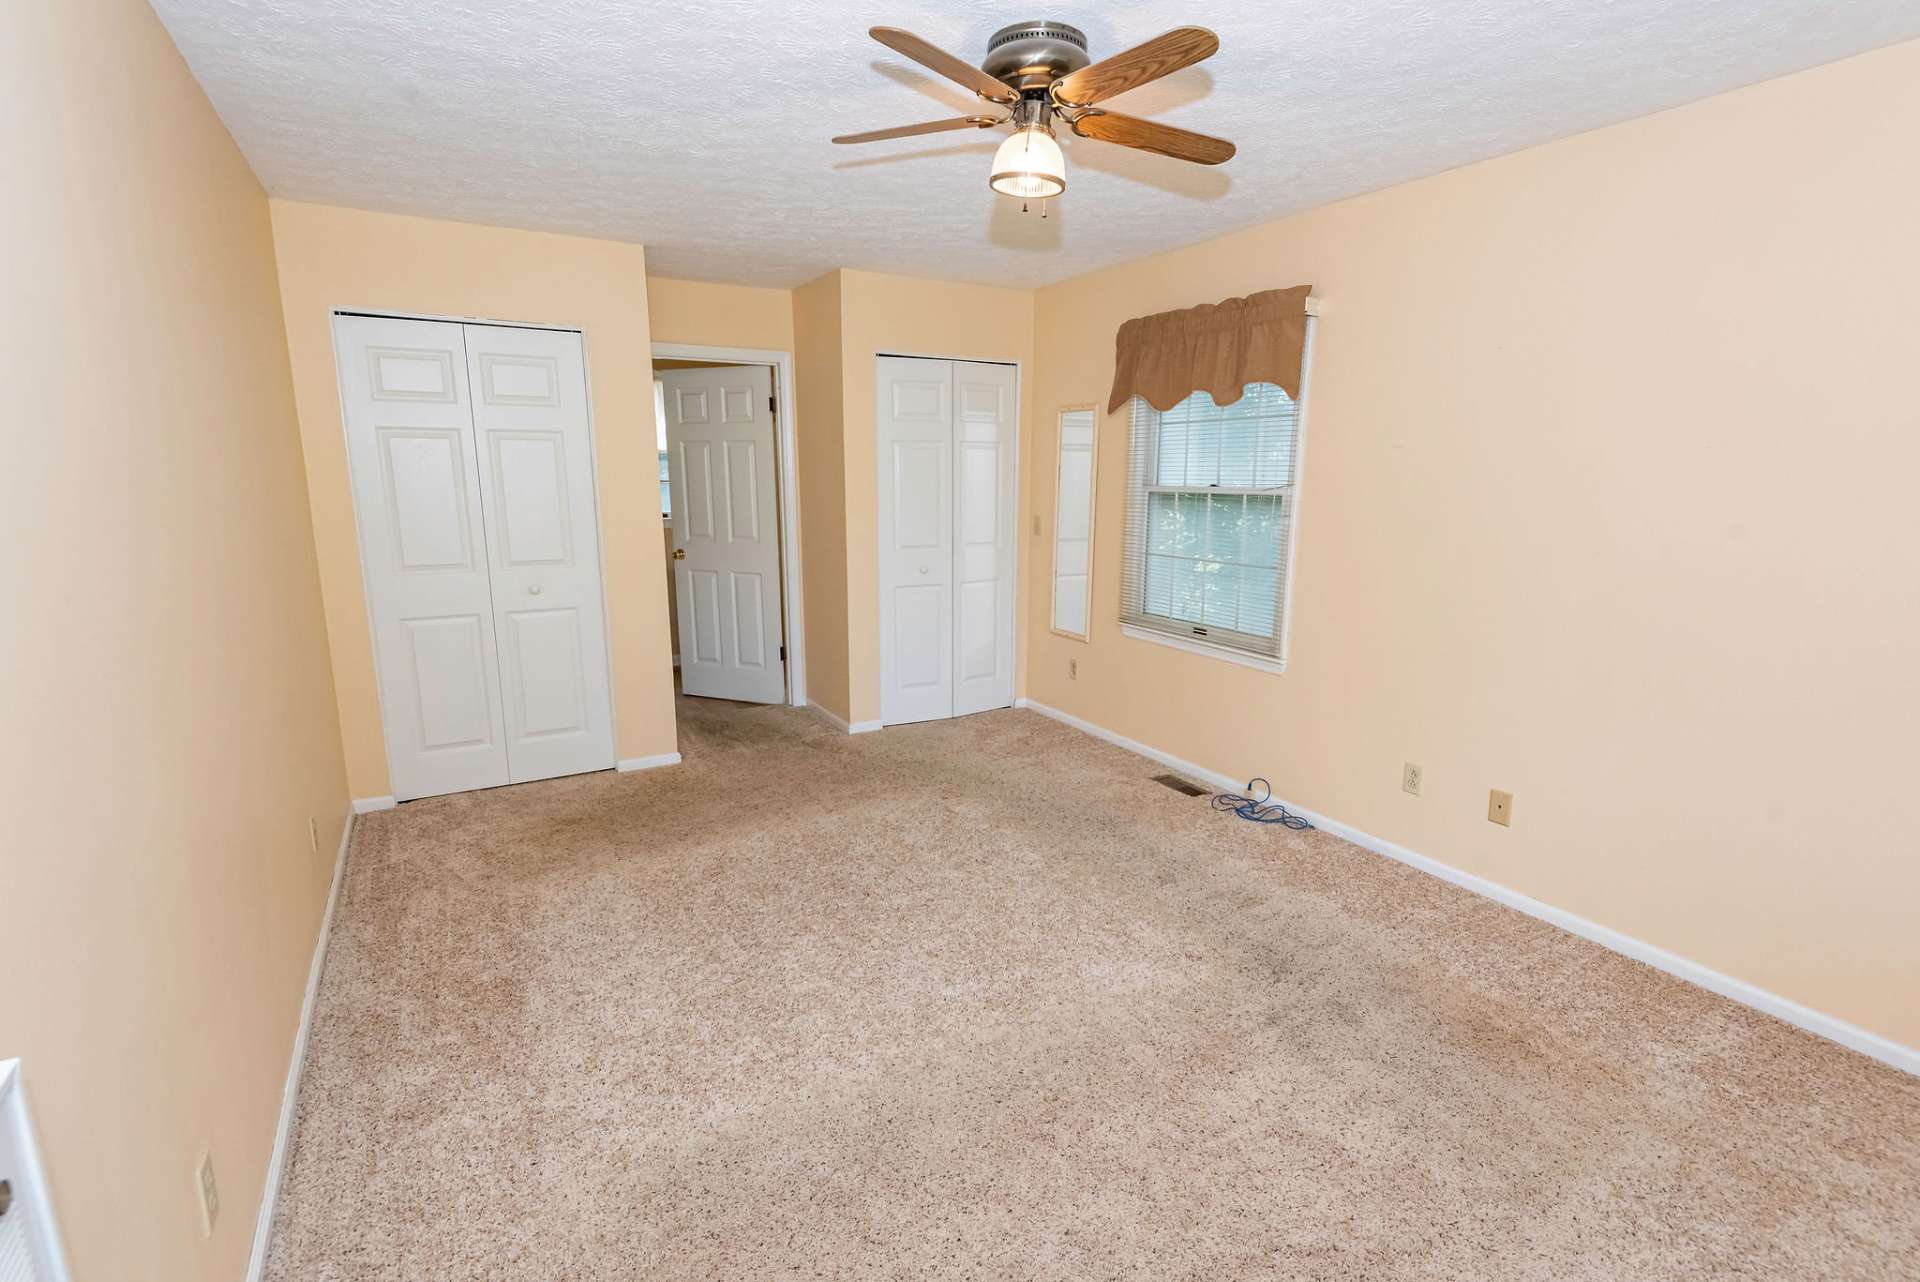 The nicely sized master suite is located on the main level and offers comfortable carpeted floor, two closets, and a private bath.